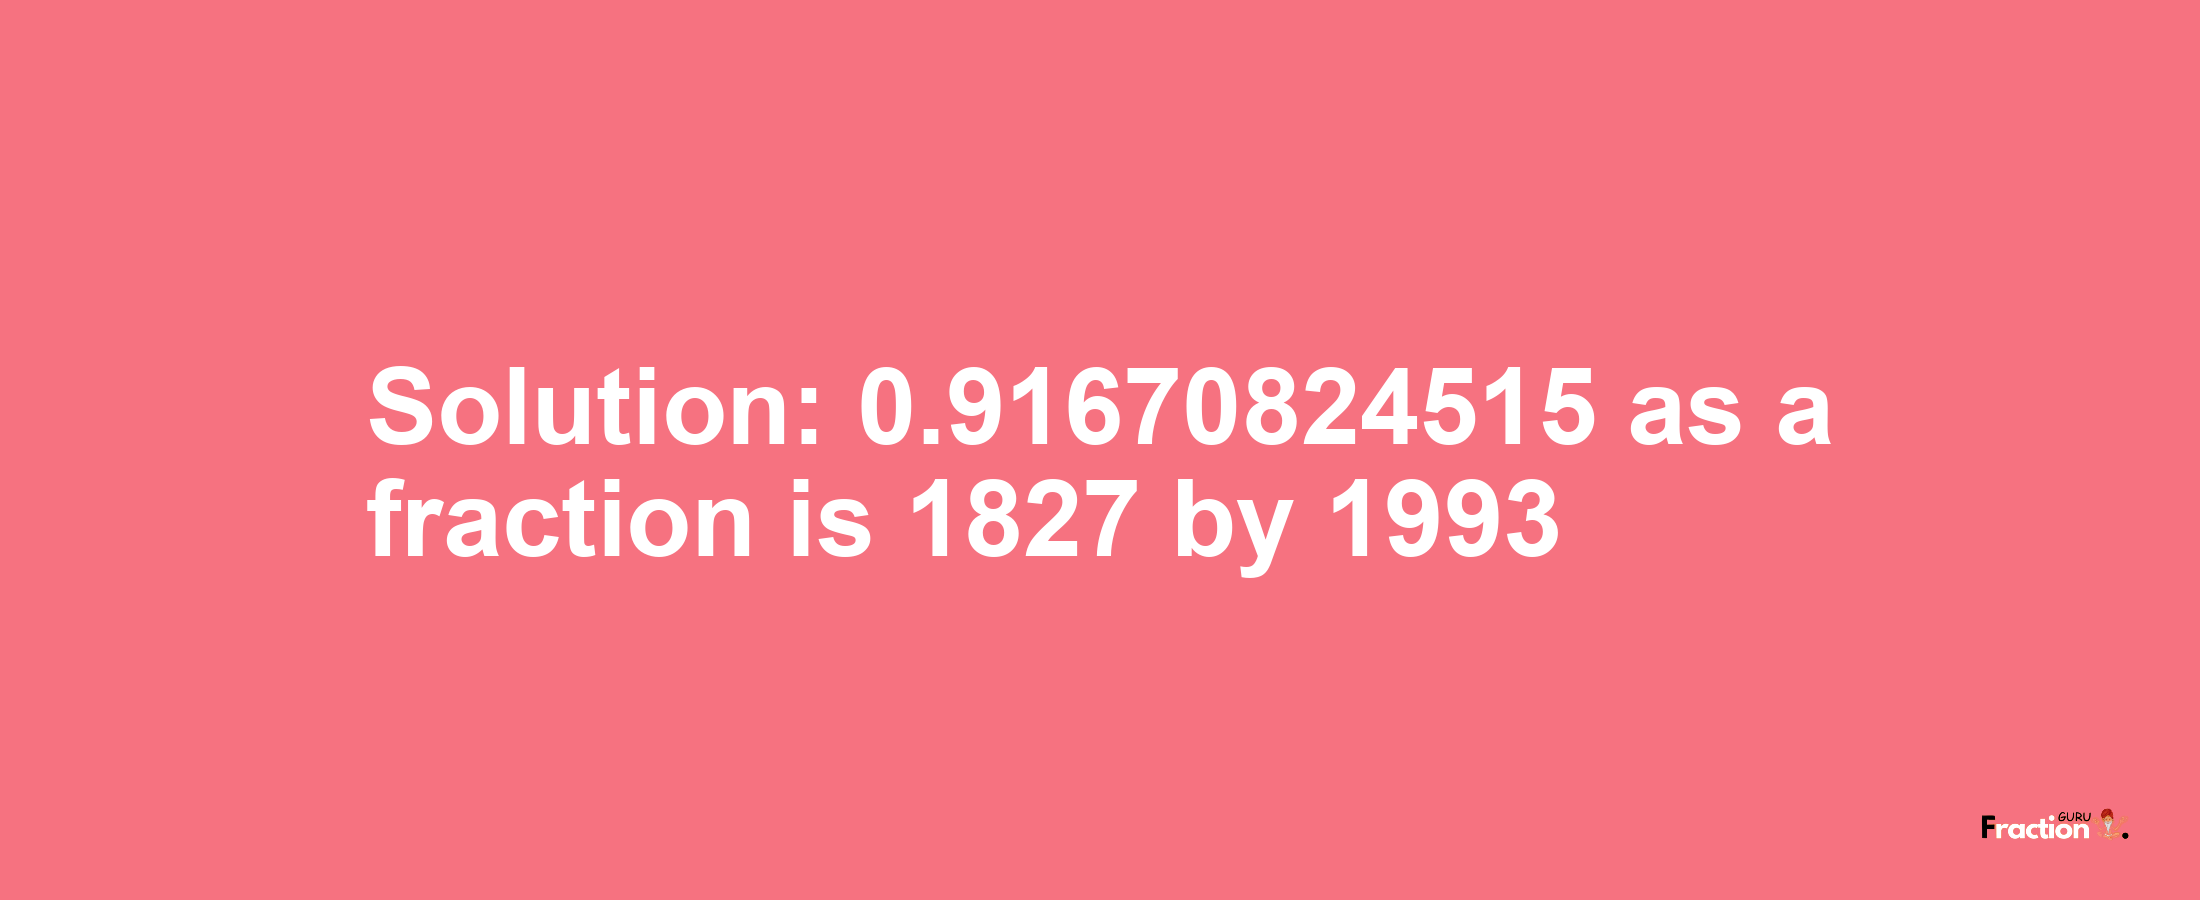 Solution:0.91670824515 as a fraction is 1827/1993